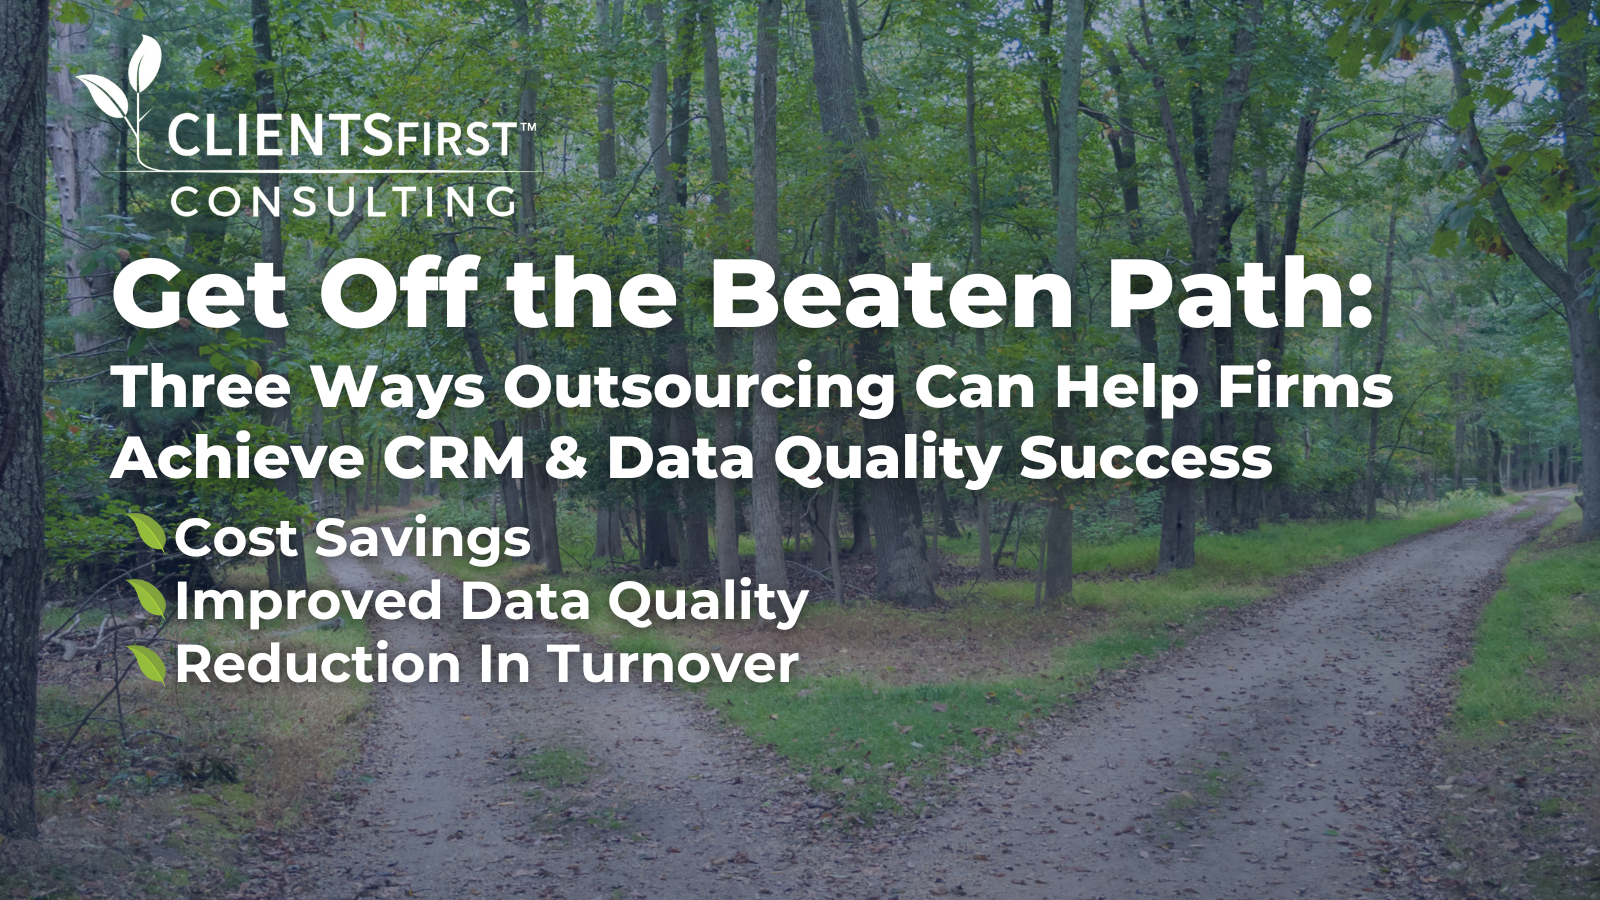 Get Off The Beaten Path: Three Ways Outsourcing Can Help Firms Achieve CRM & Data Quality Success